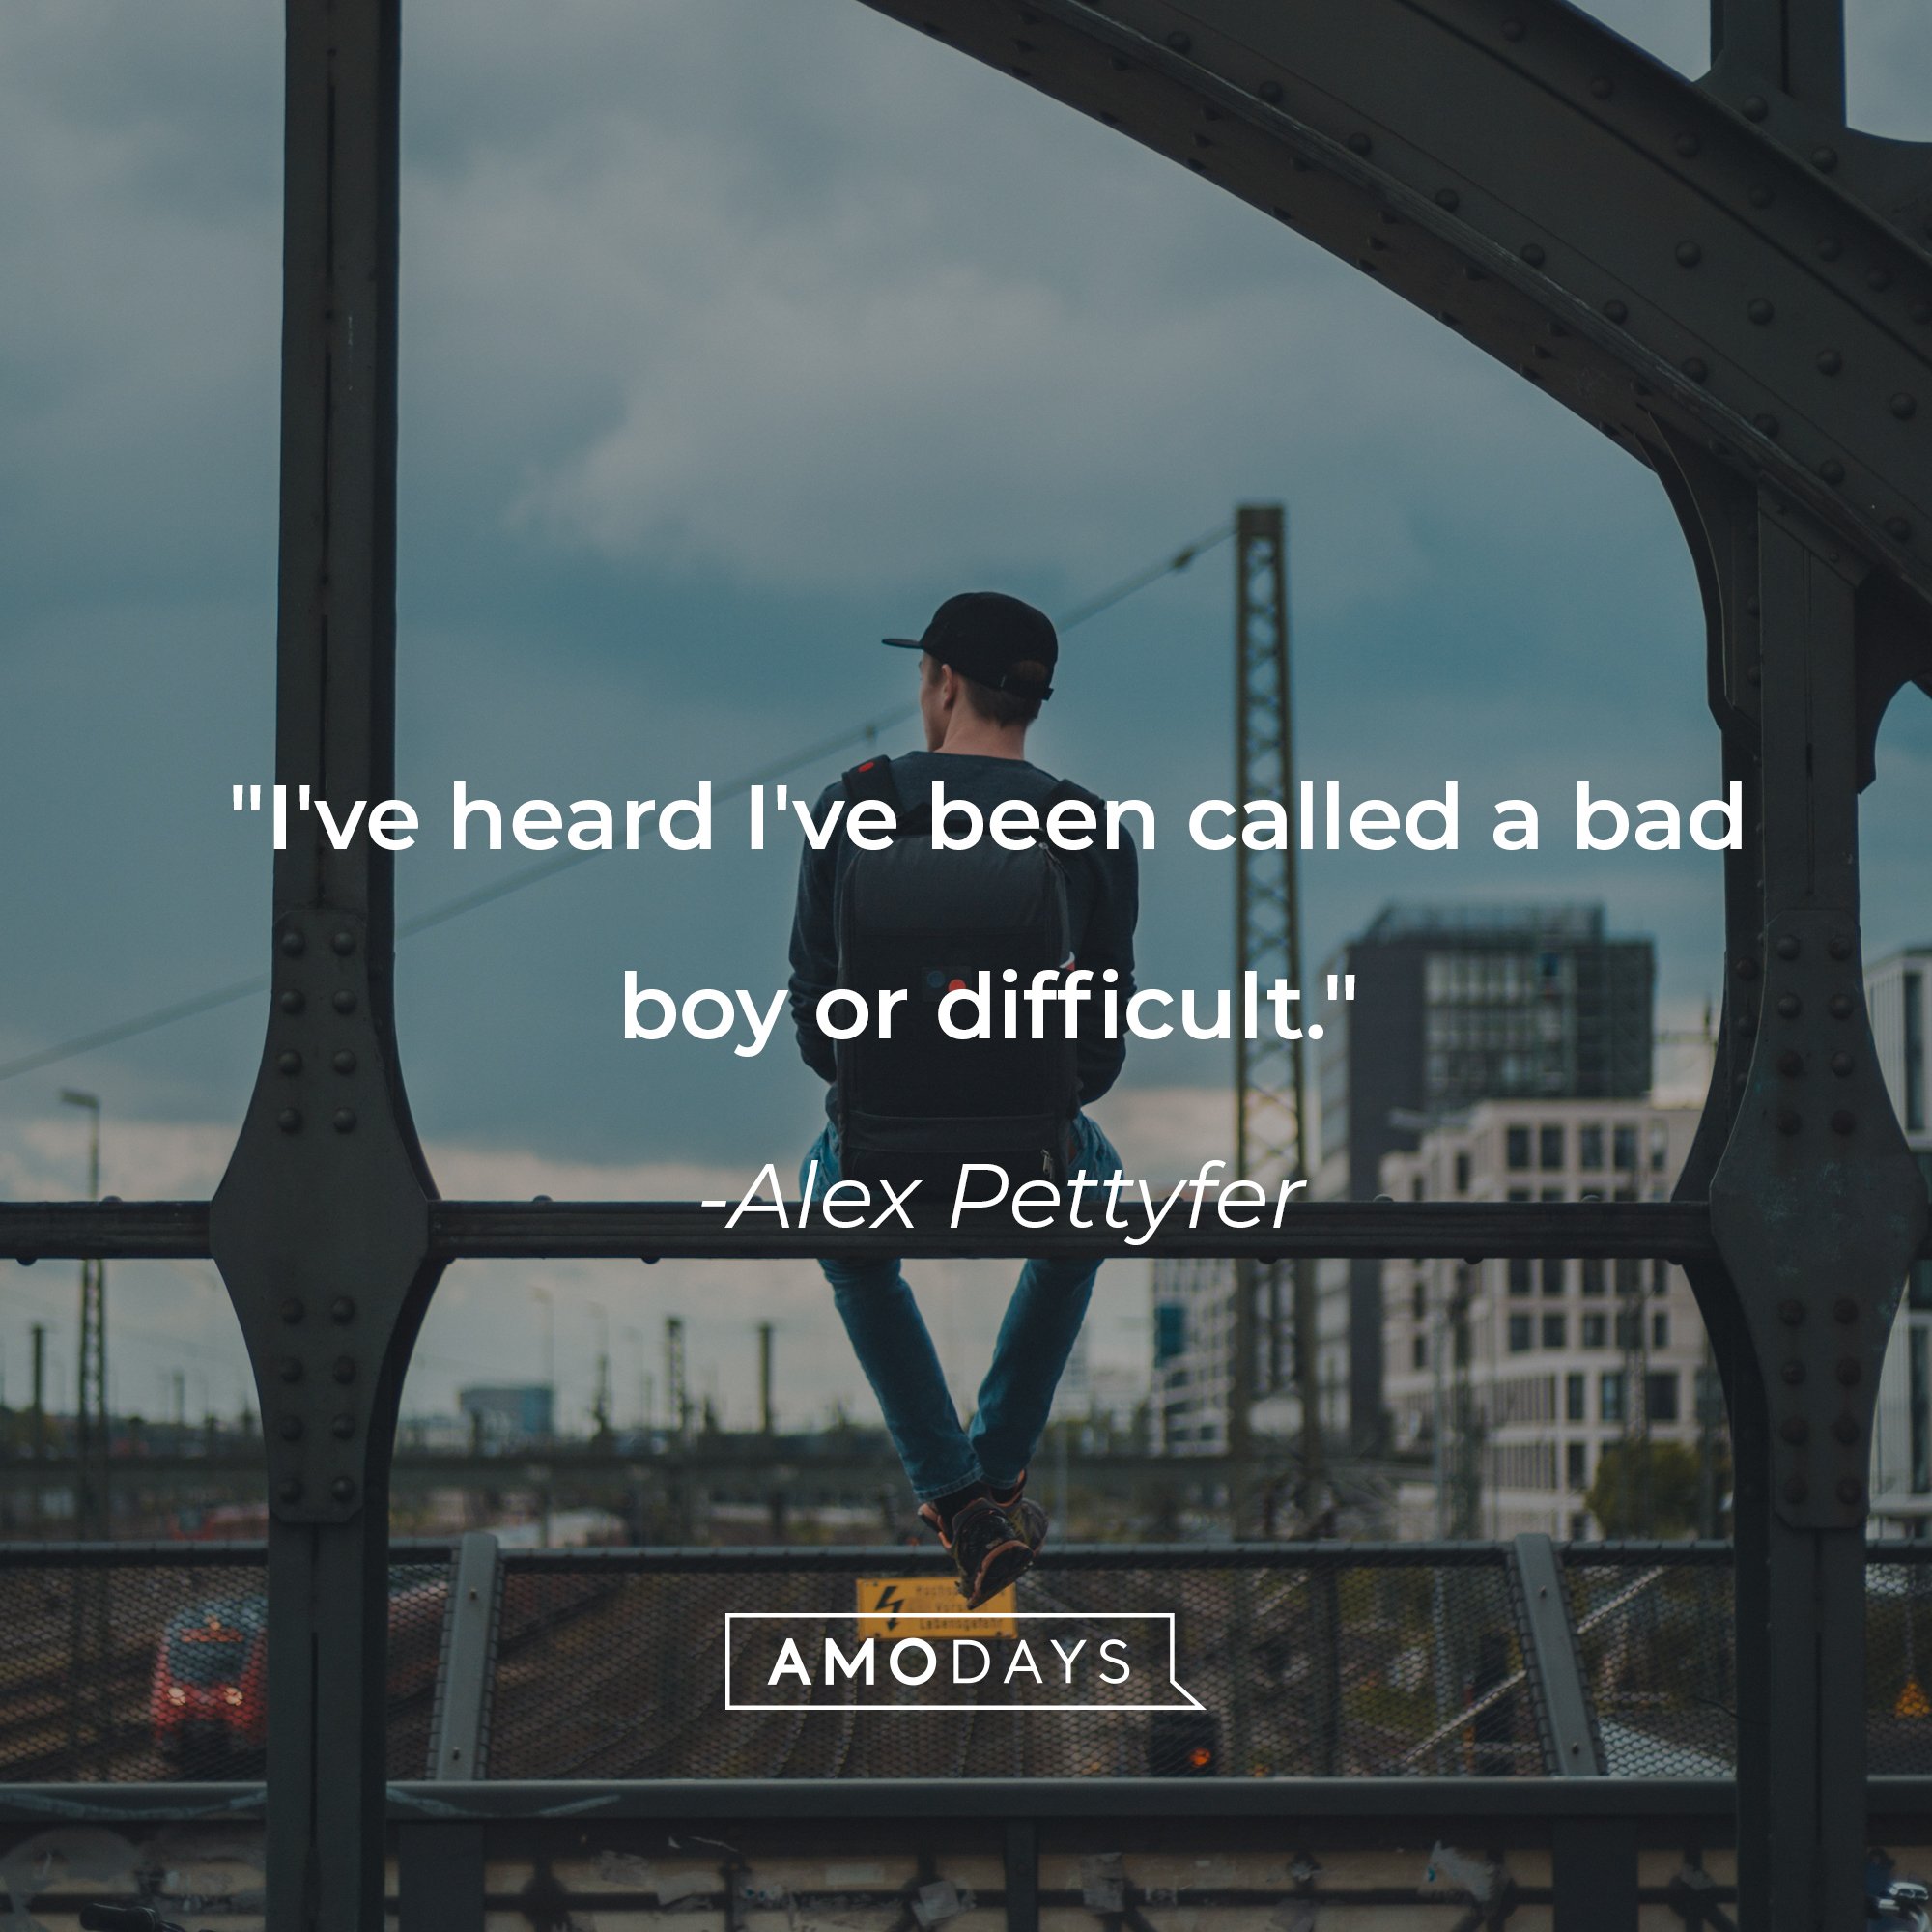 Alex Pettyfer's quote: "I've heard I've been called a bad boy, or difficult." | Image: AmoDays